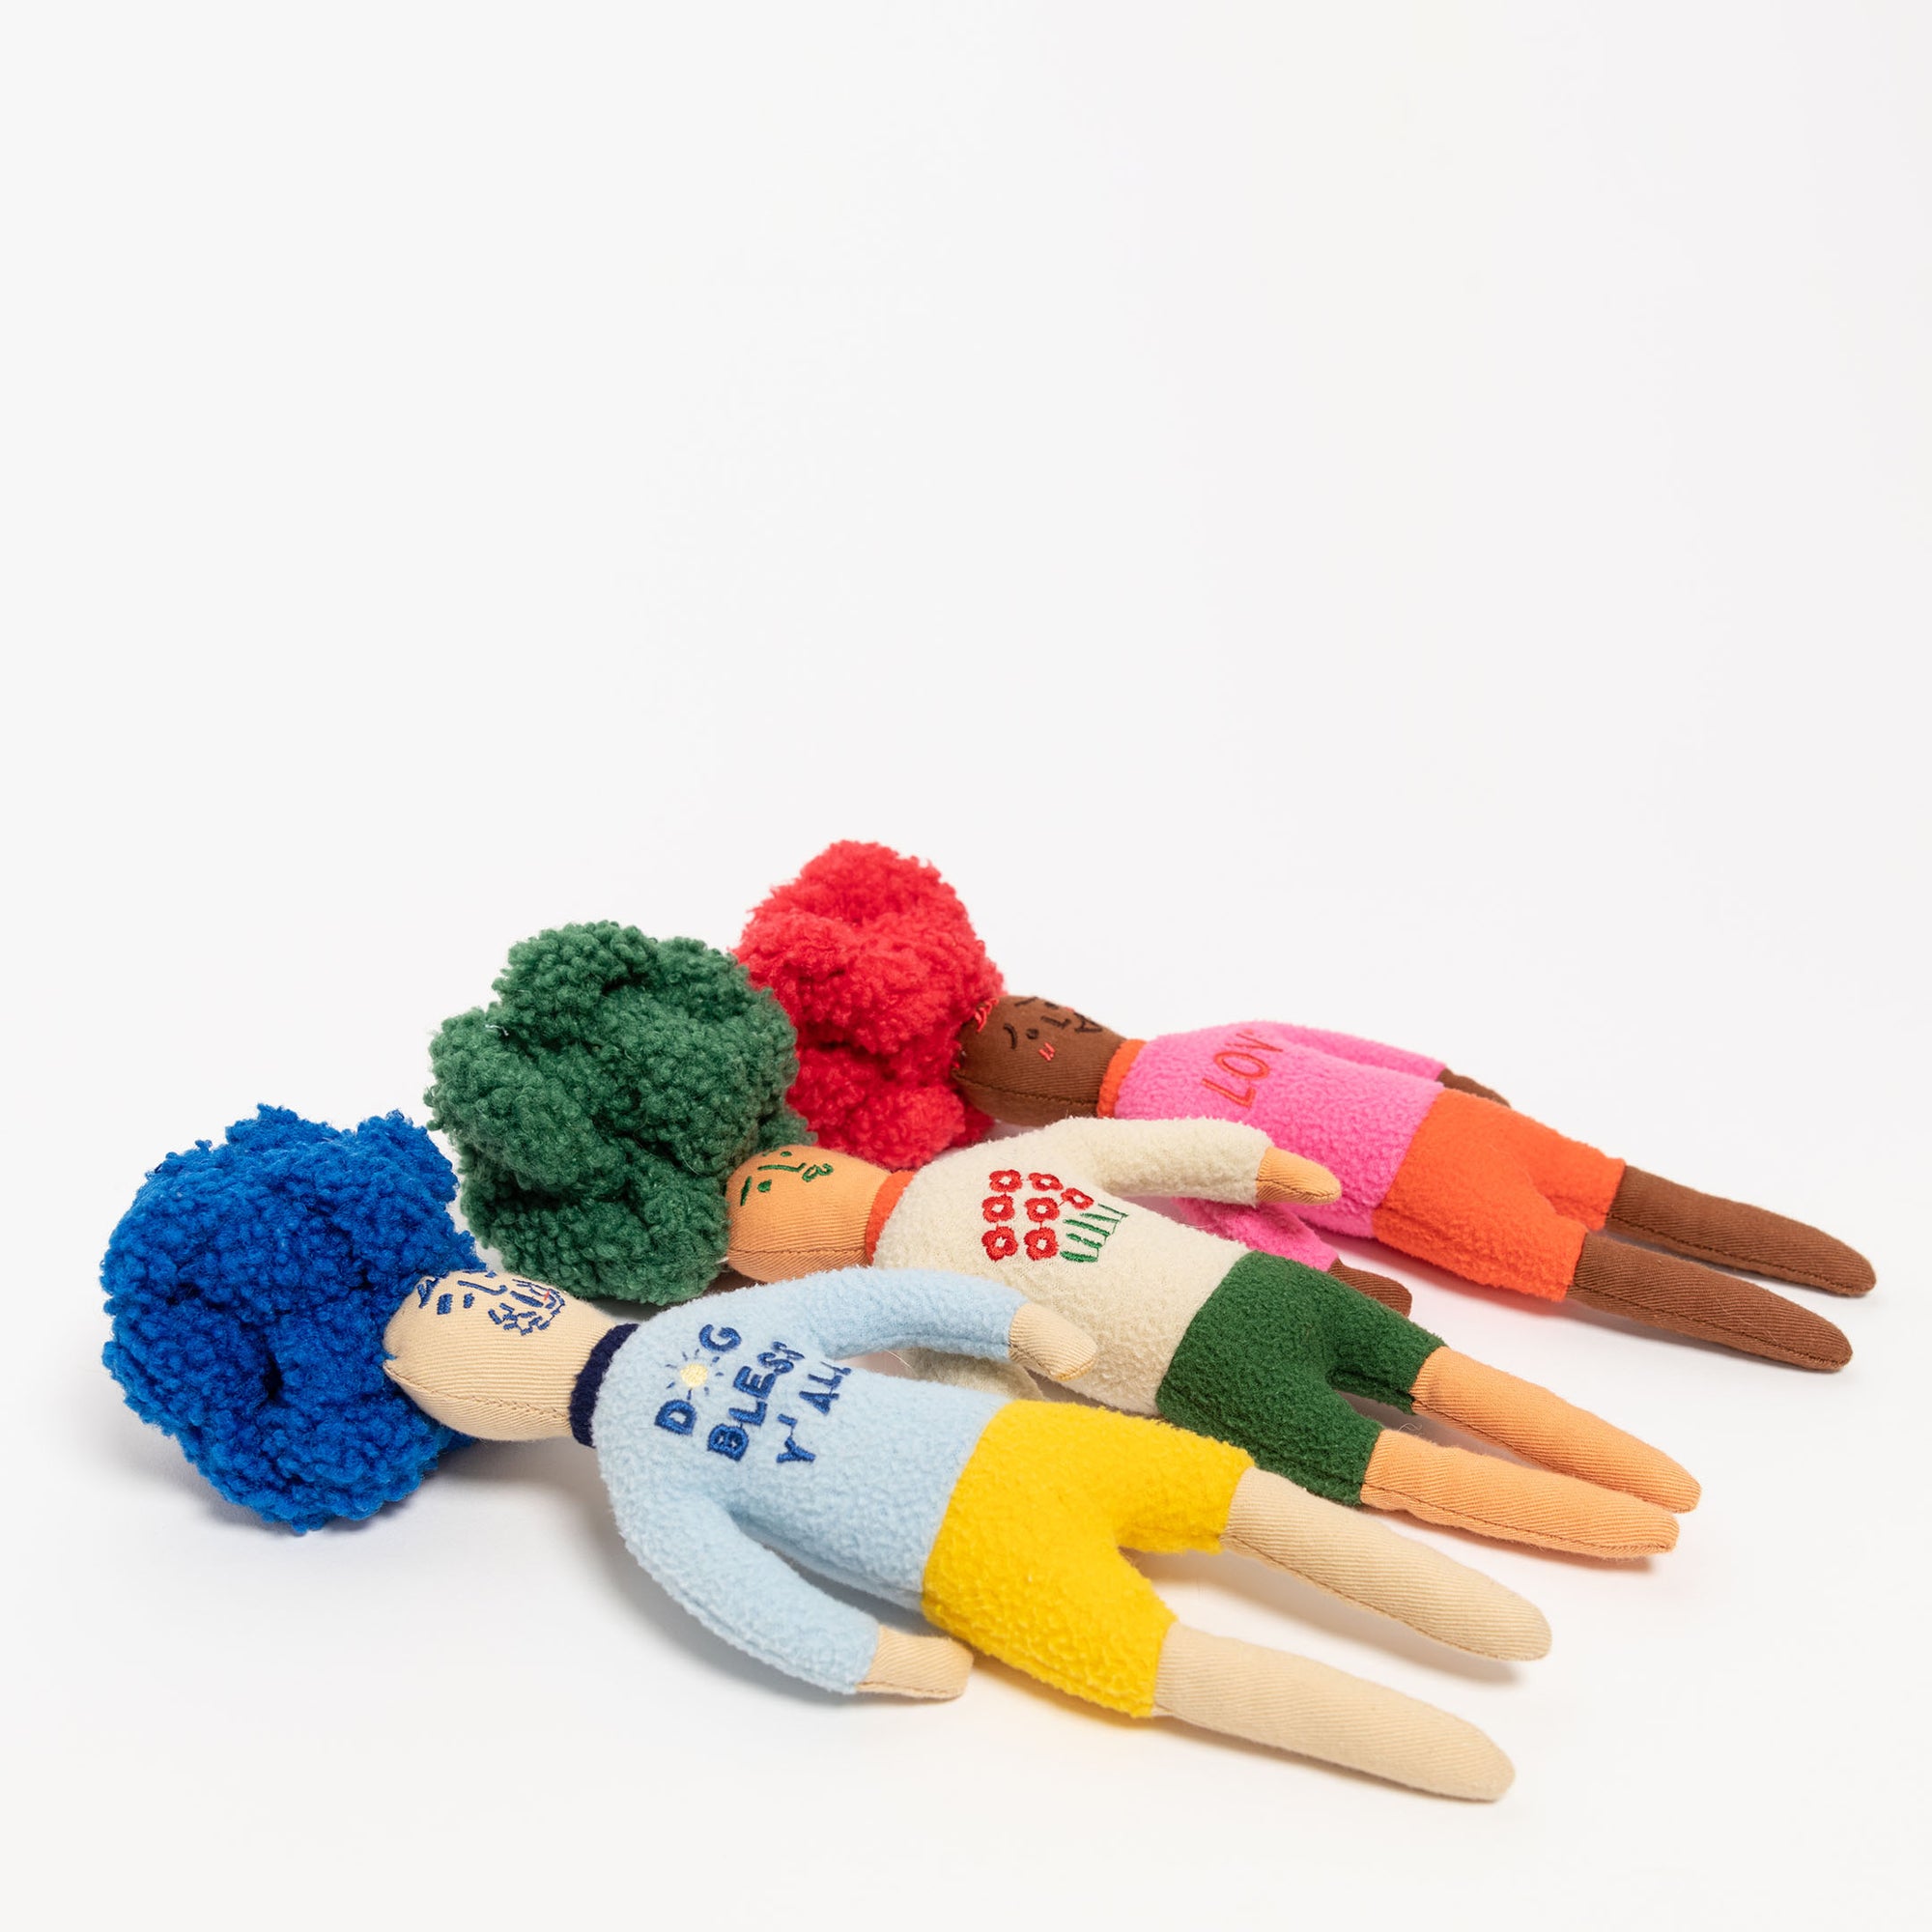 The image displays a set of four handcrafted nosework toys, designed as colorful dolls with pom-pom hair in shades of blue, green, red, and brown, set against a white background. Each toy has unique clothing—a blue sweater with "DOG BLESS Y'ALL," a green one with red polka dots, a pink "LOVE" shirt, and a cream with red dots—meant to hide treats for dogs to find. These toys combine functionality and style, catering to a dog's sense of smell and the owner's aesthetic taste.